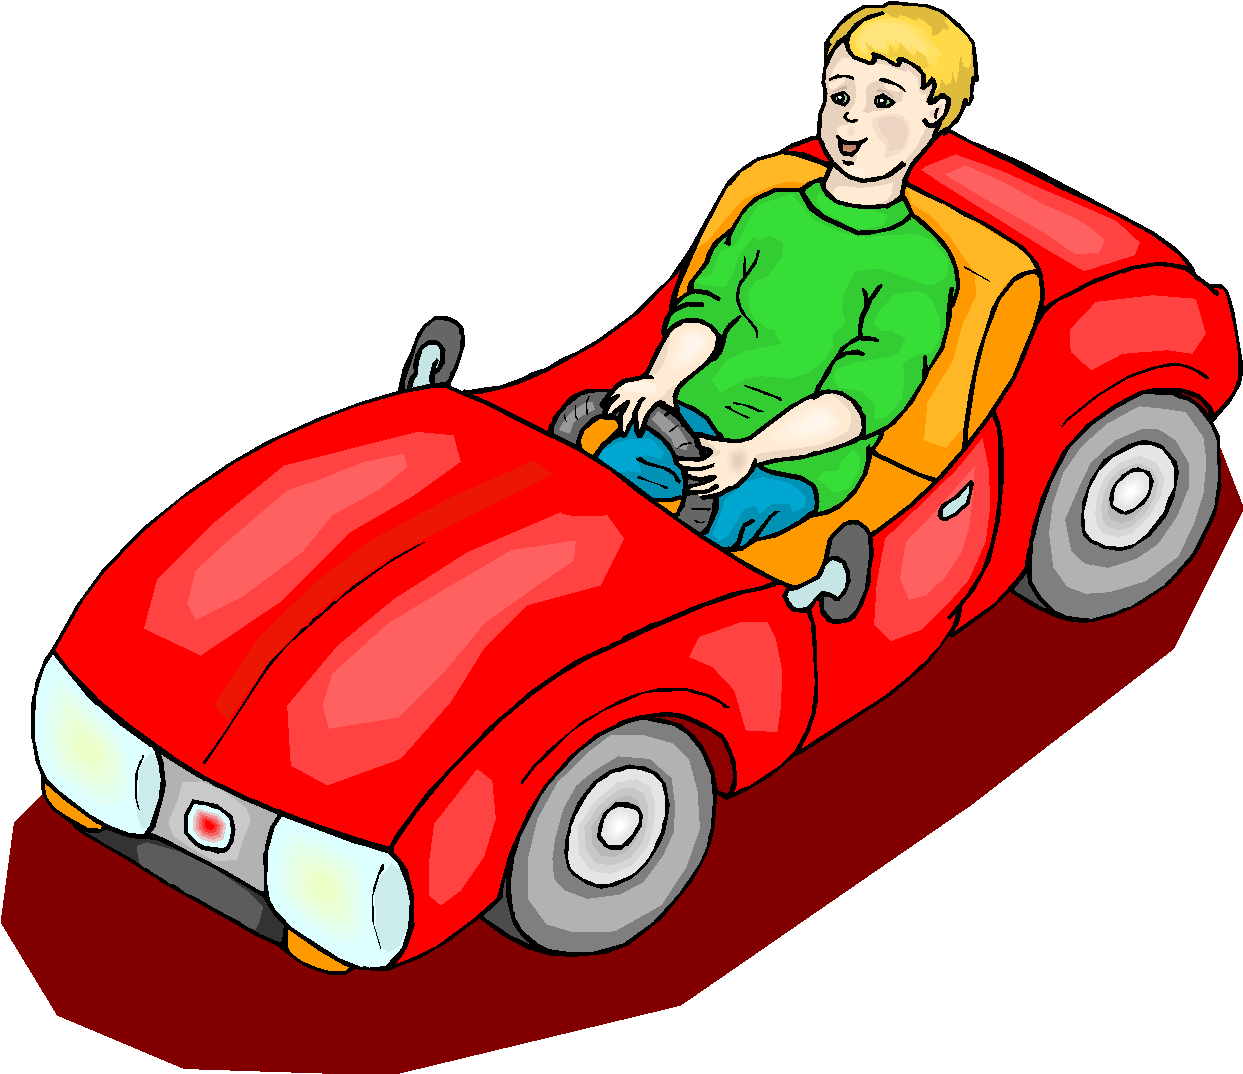 Riding In Car Clipart | Clipart Panda - Free Clipart Images